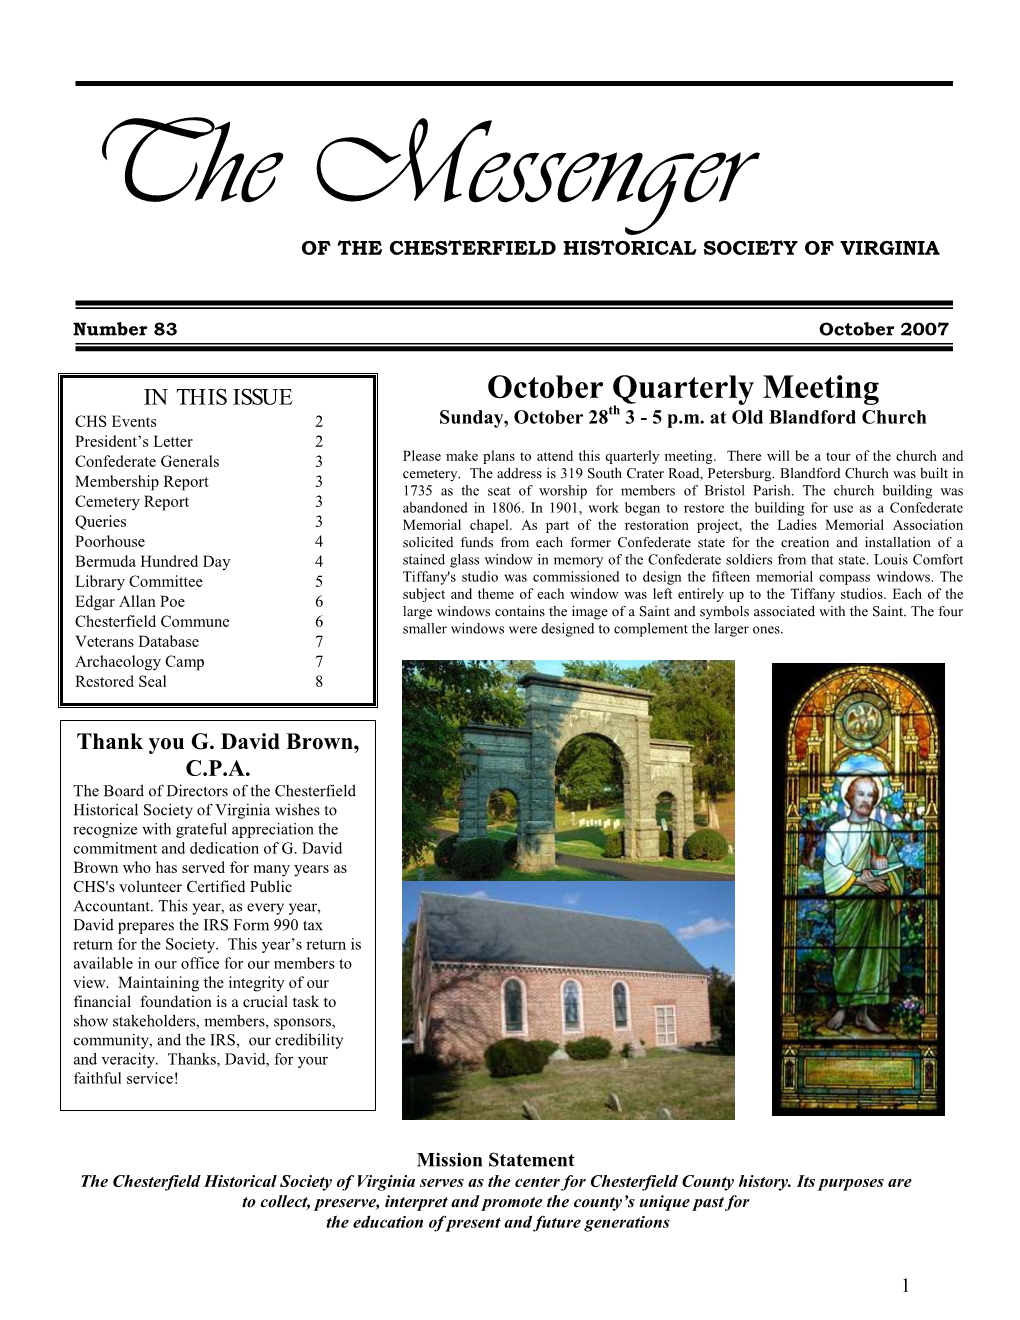 The Messenger of the CHESTERFIELD HISTORICAL SOCIETY of VIRGINIA